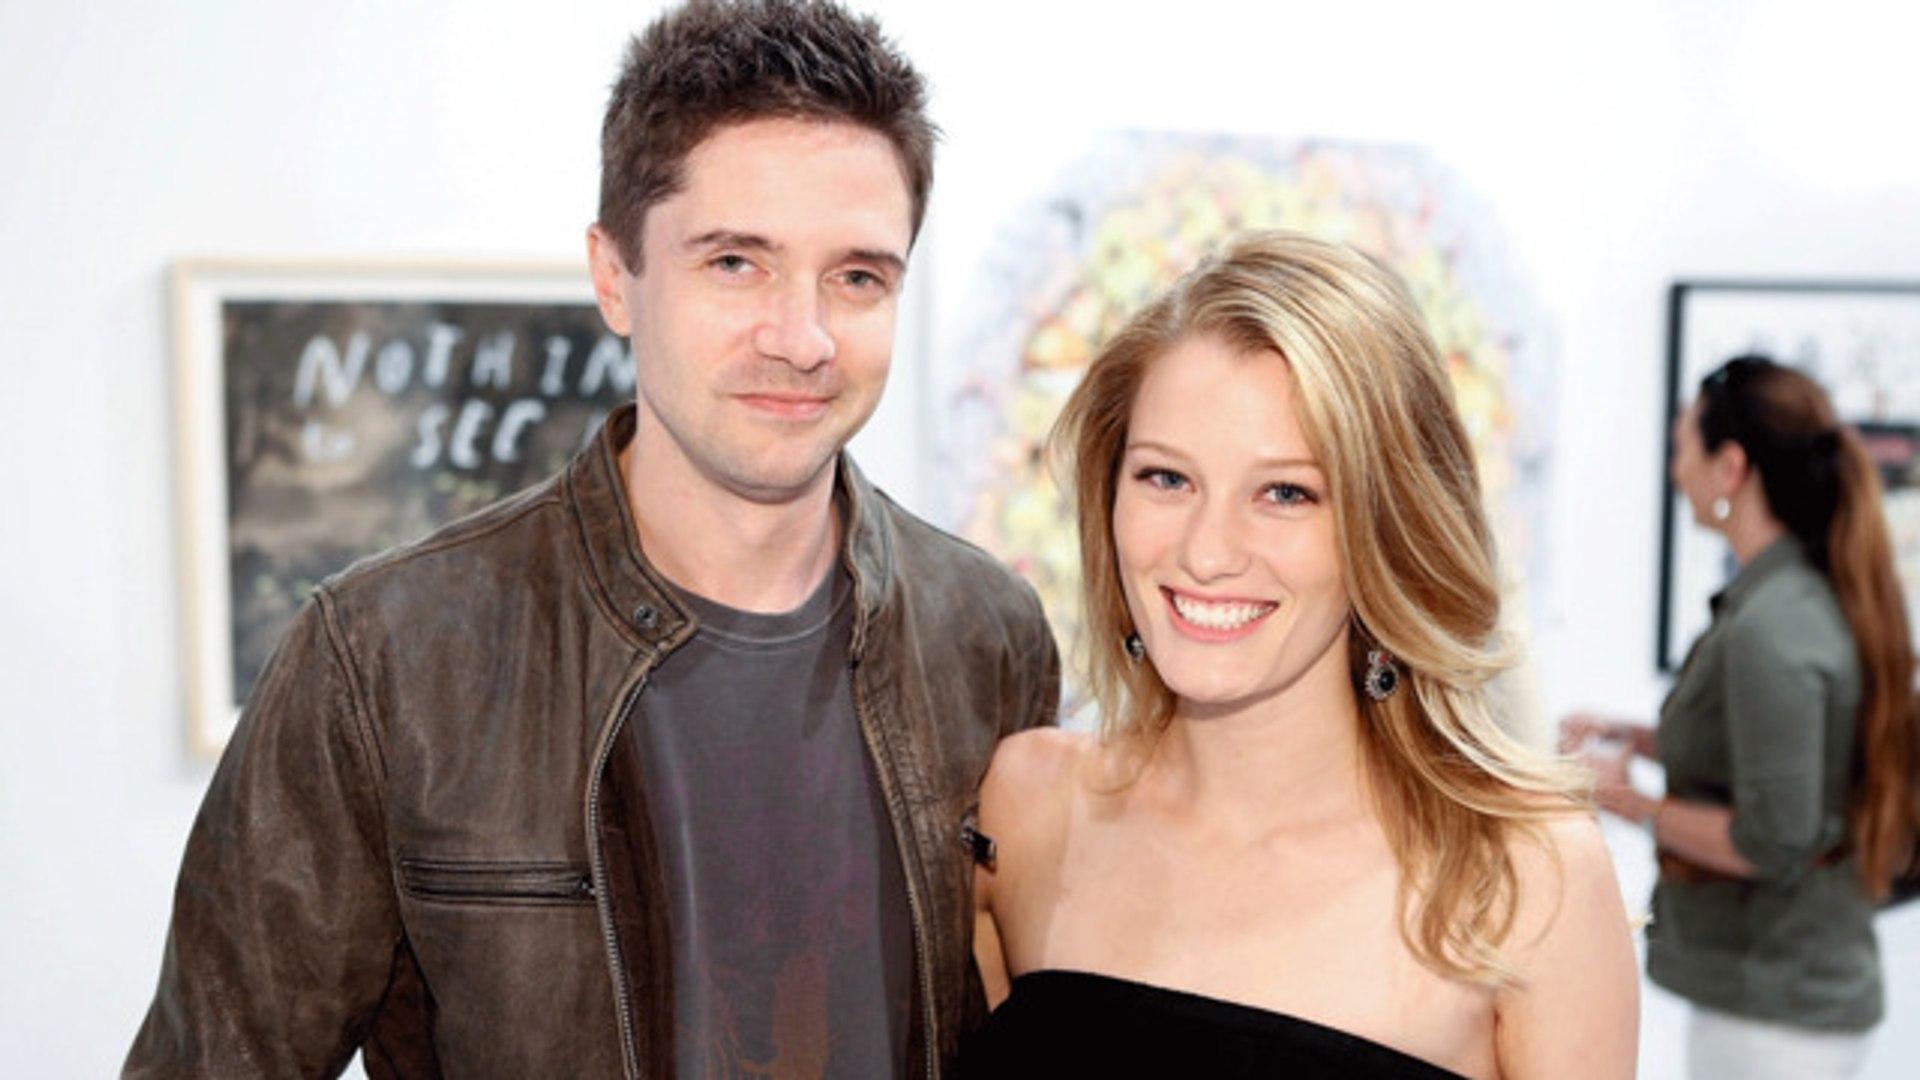 Topher Grace to Wed Ashley Hinshaw This Weekend